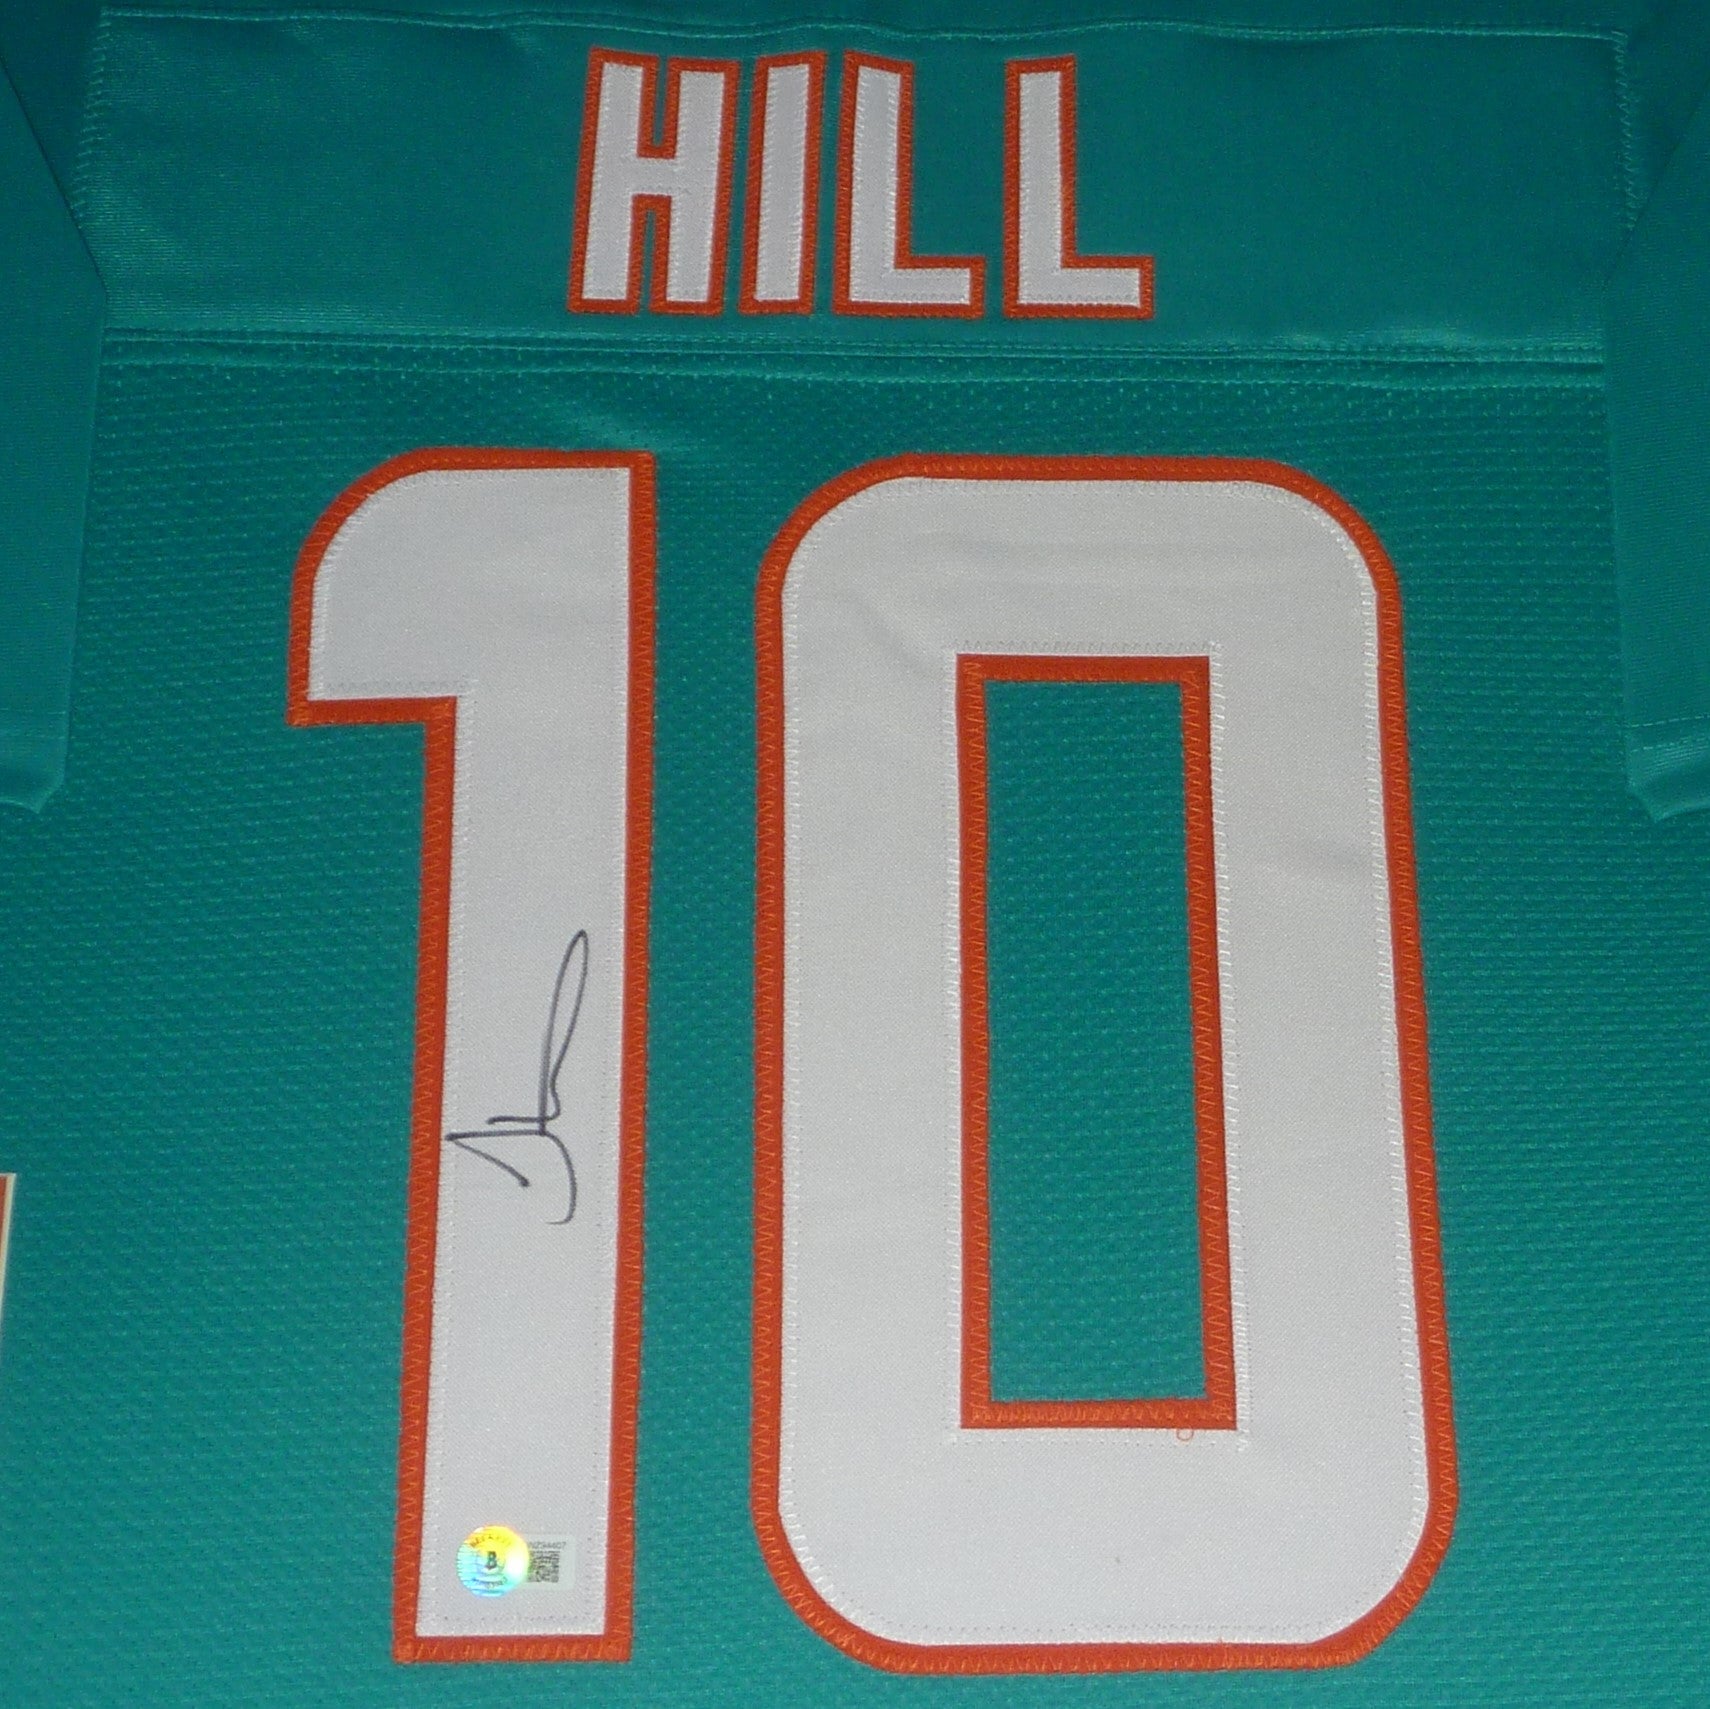 dolphins hill jersey